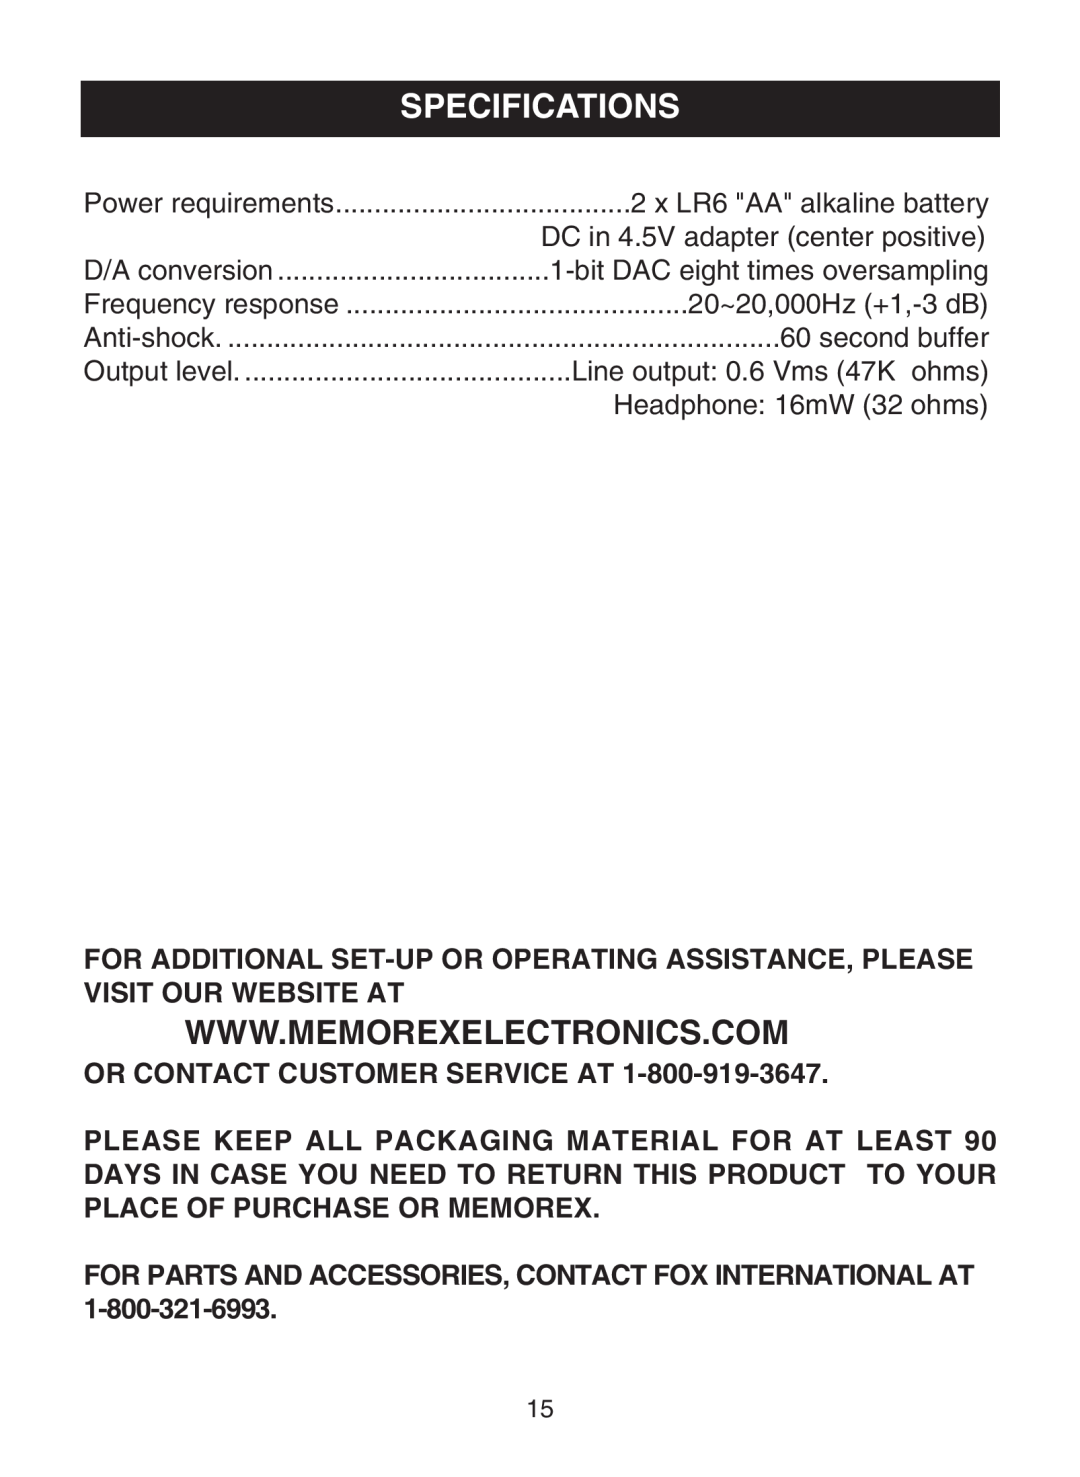 Memorex MD6483 manual Specifications 